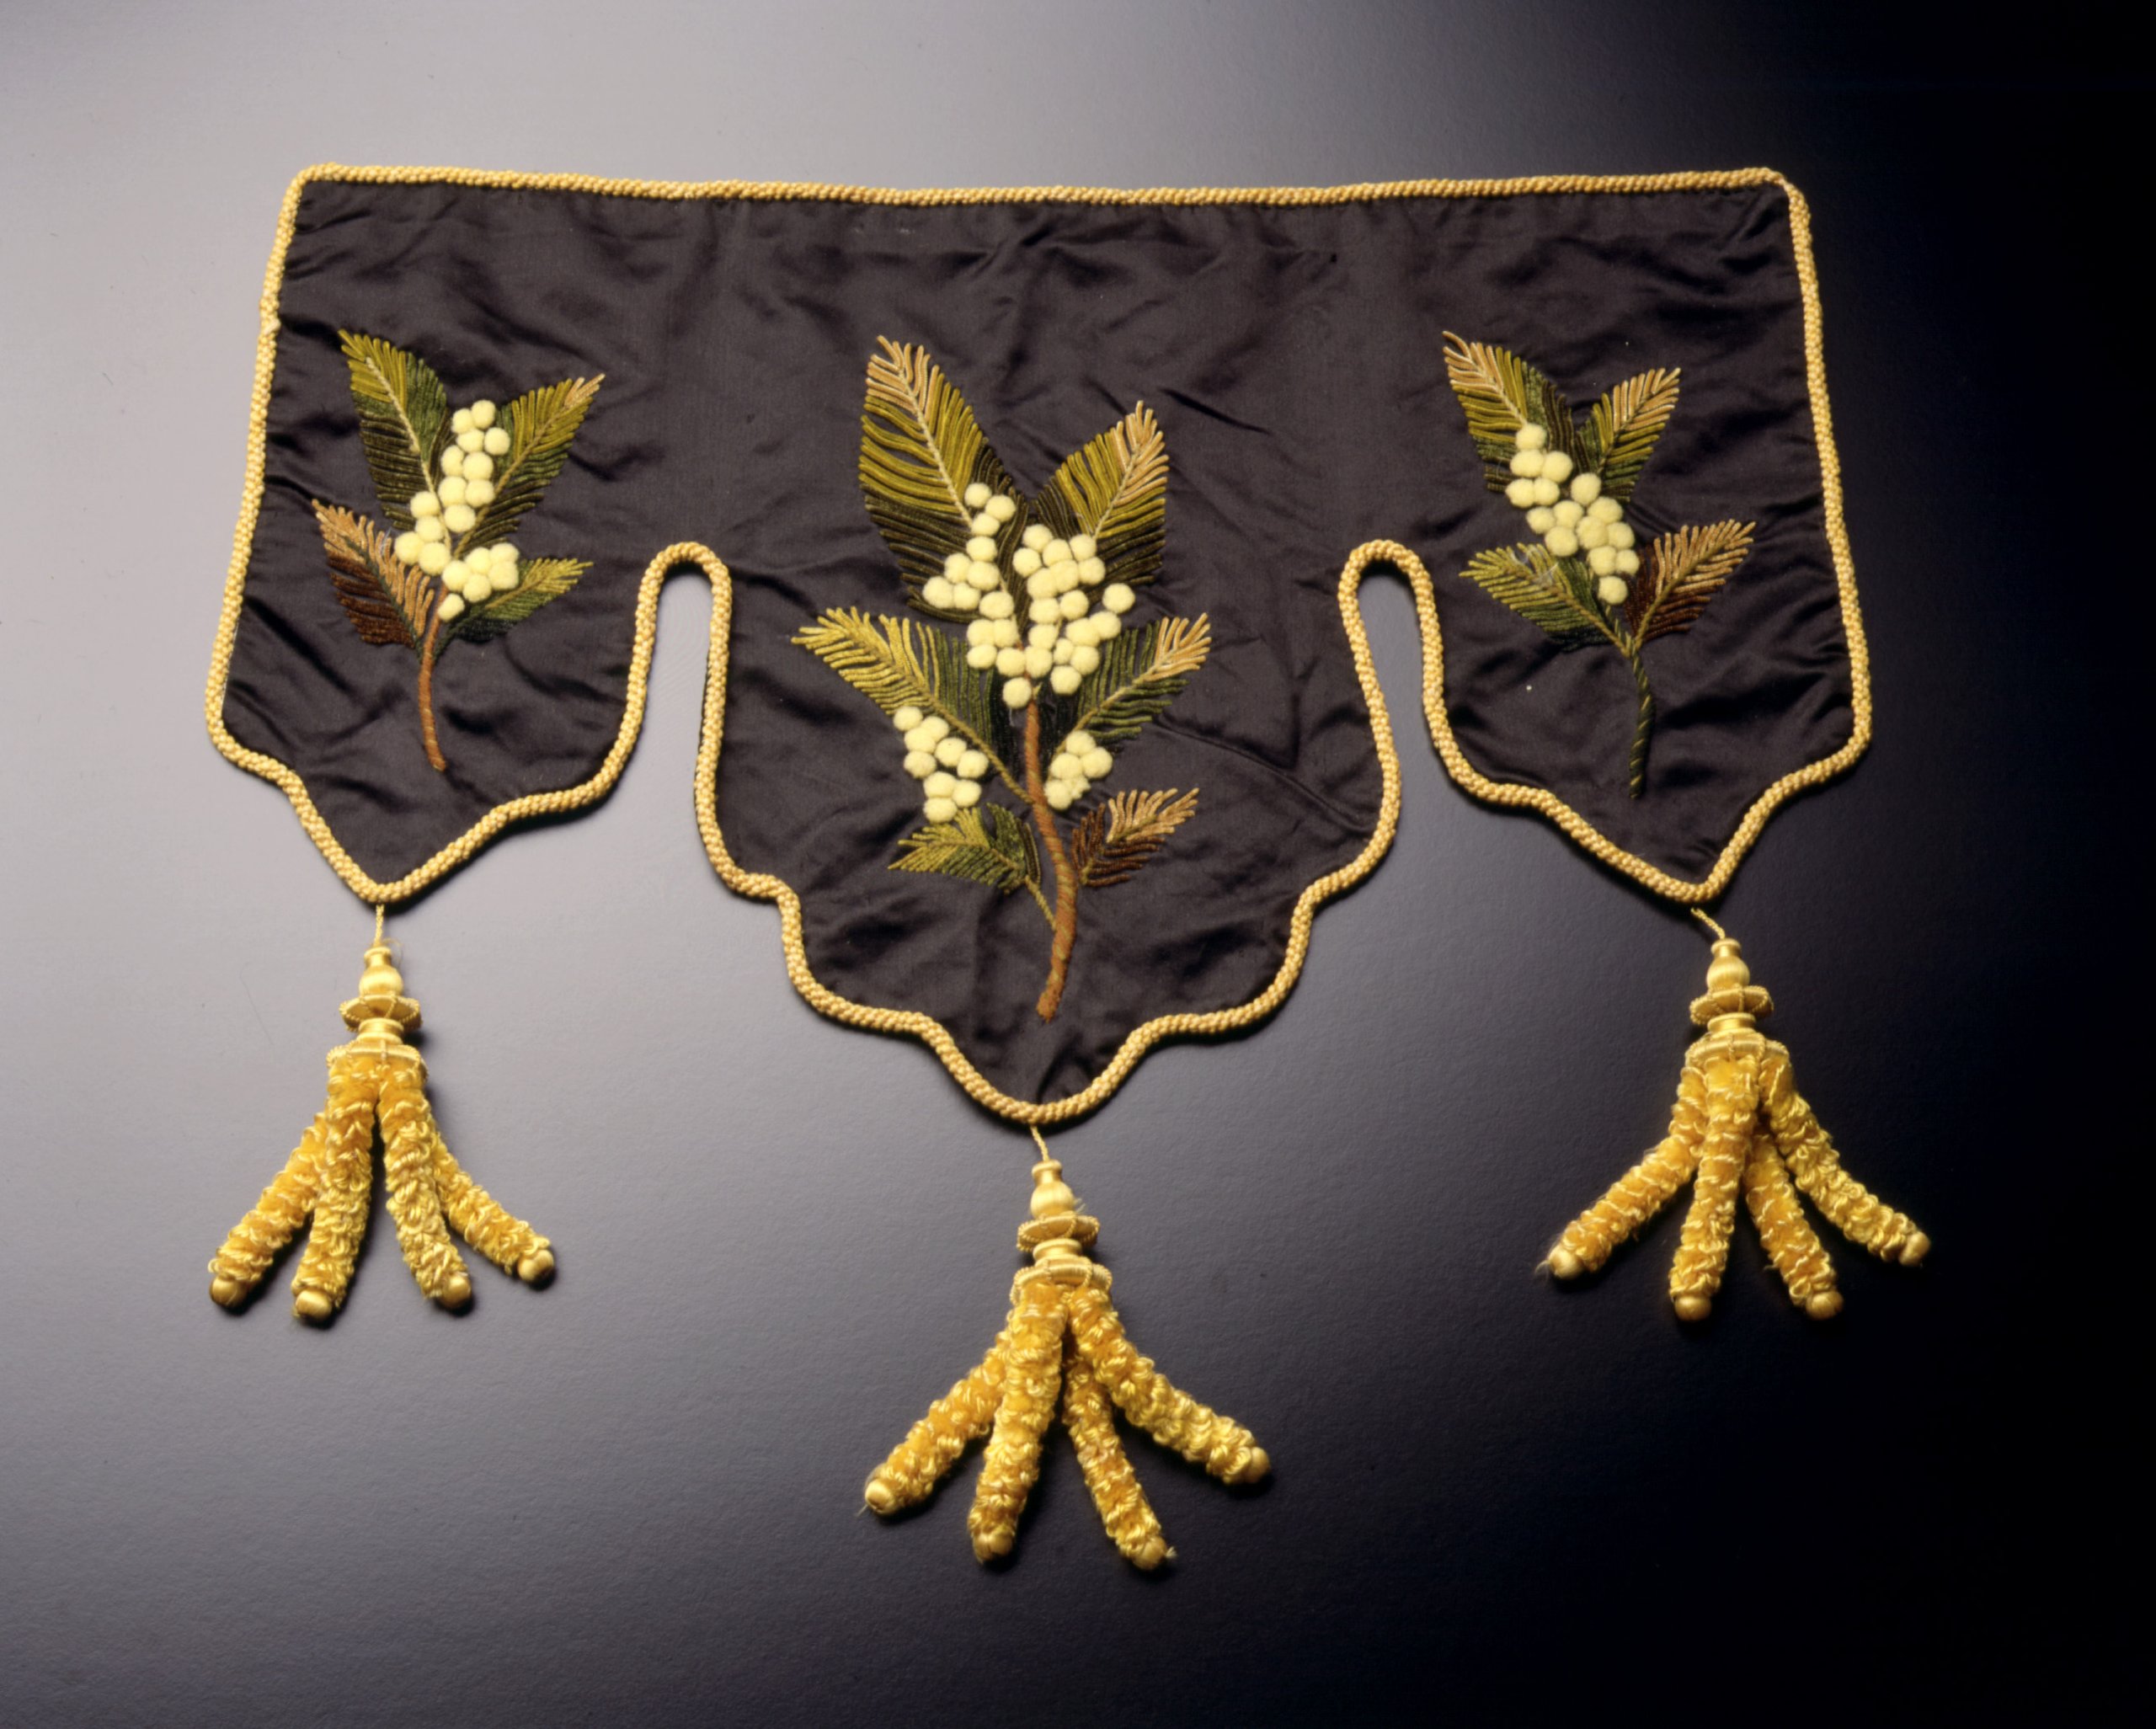 Valance made by Isabella Murray (daughter-in-law of Sir Henry Parkes)